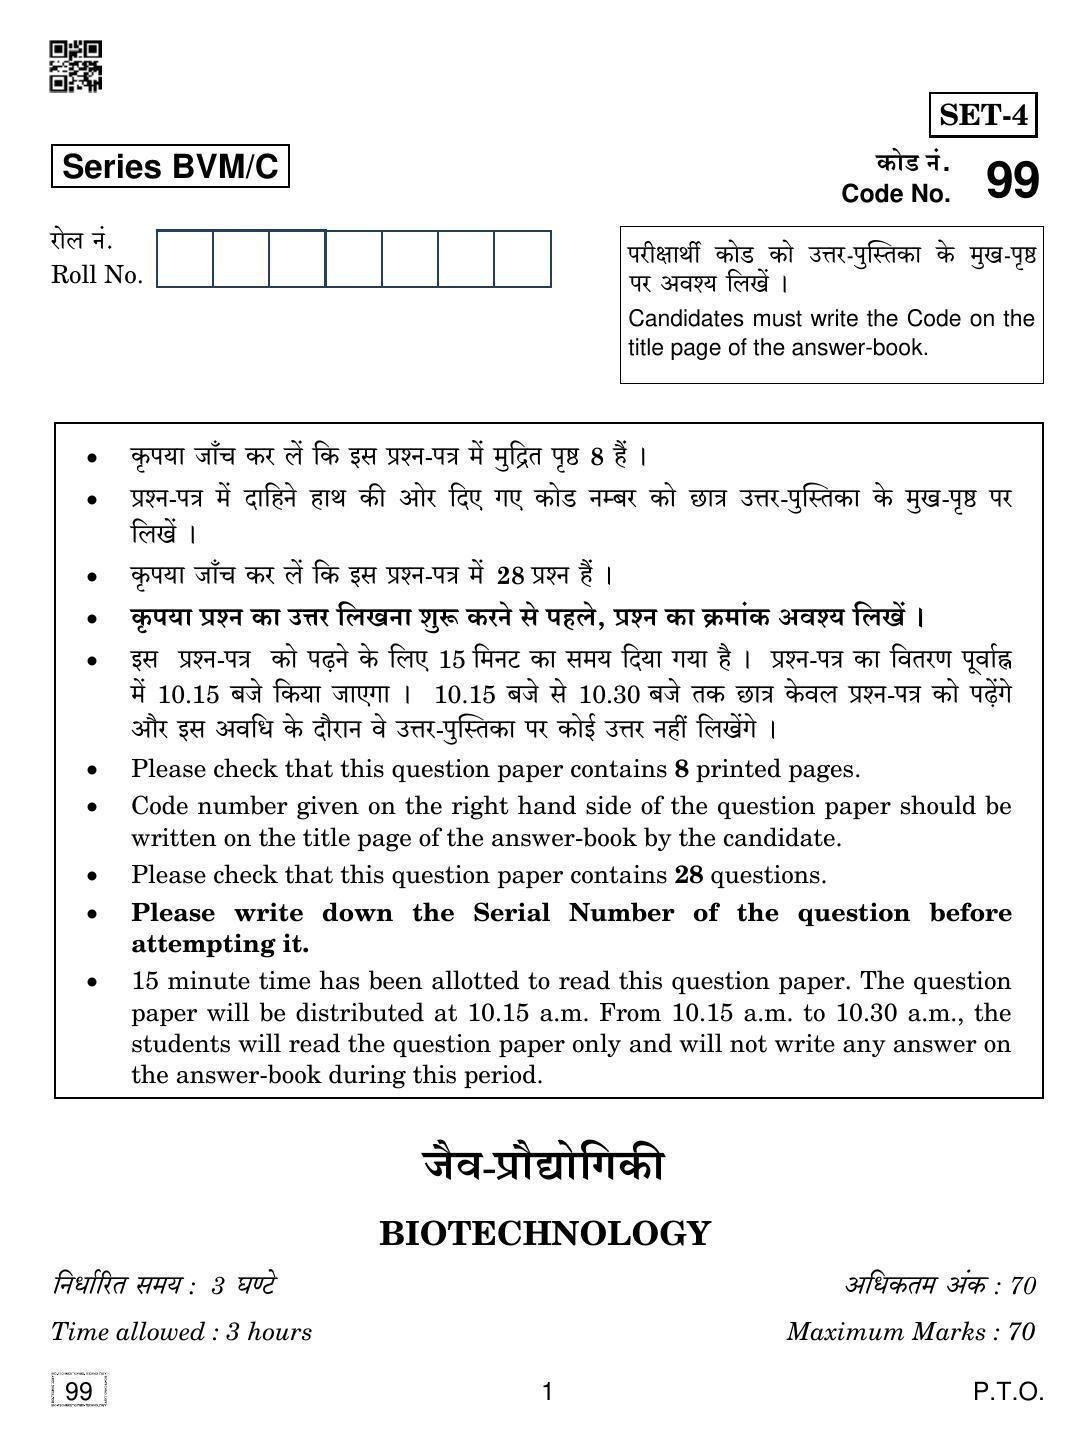 CBSE Class 12 99 BIOTECHNOLOGY 2019 Compartment Question Paper - Page 1